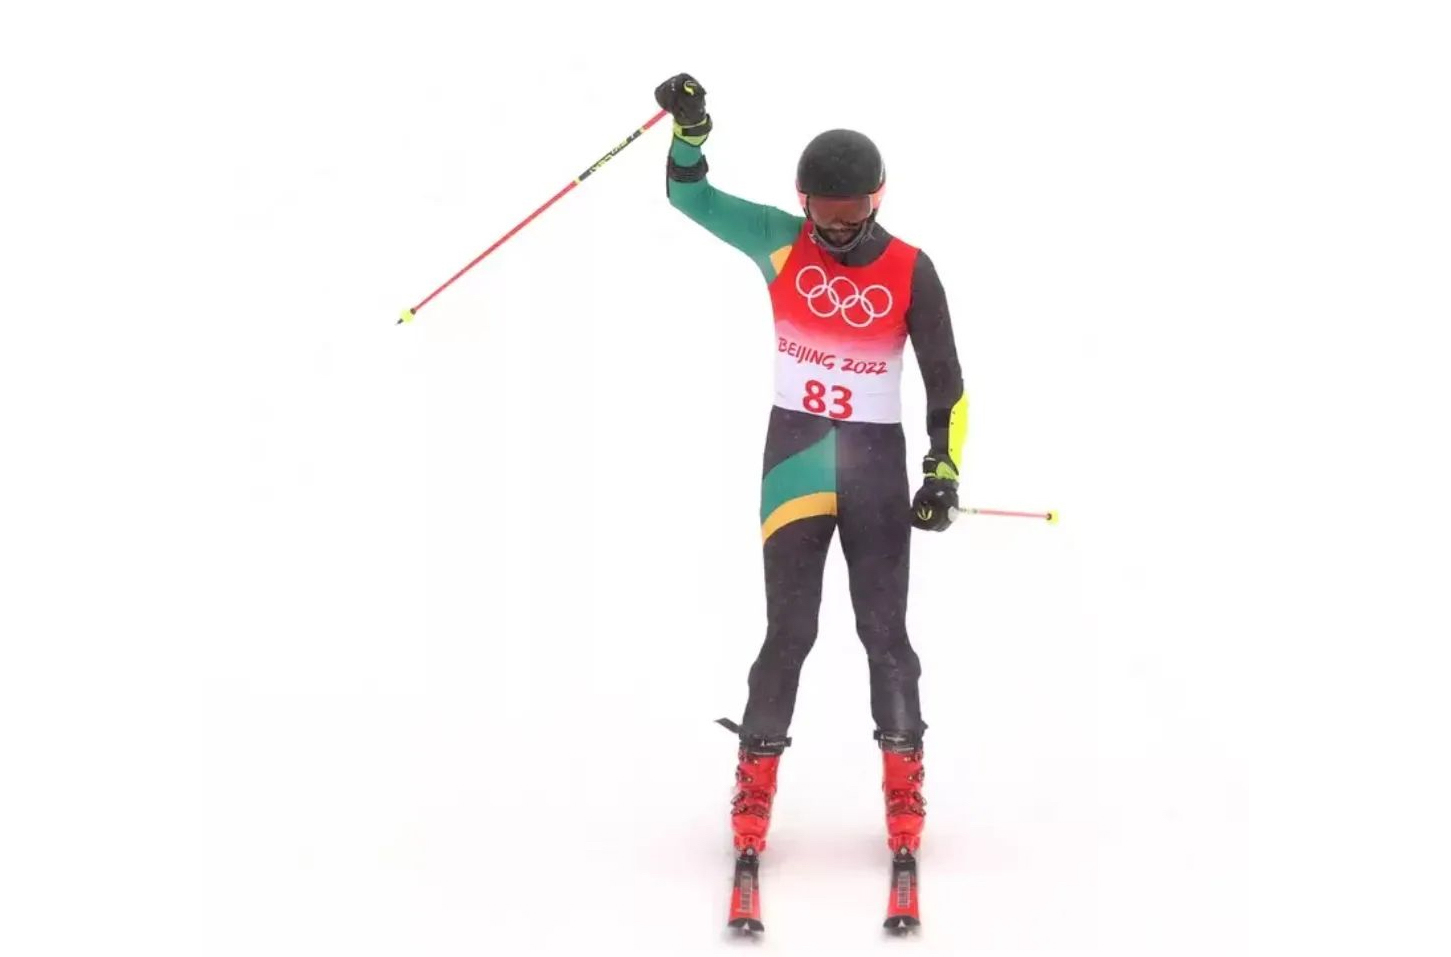 On our Blister Podcast, Benji Alexander is back on the podcast to talk about becoming Jamaica’s first Olympian alpine ski racer; his experience in Beijing and his race runs; competition and representation at the Olympic games; and more.